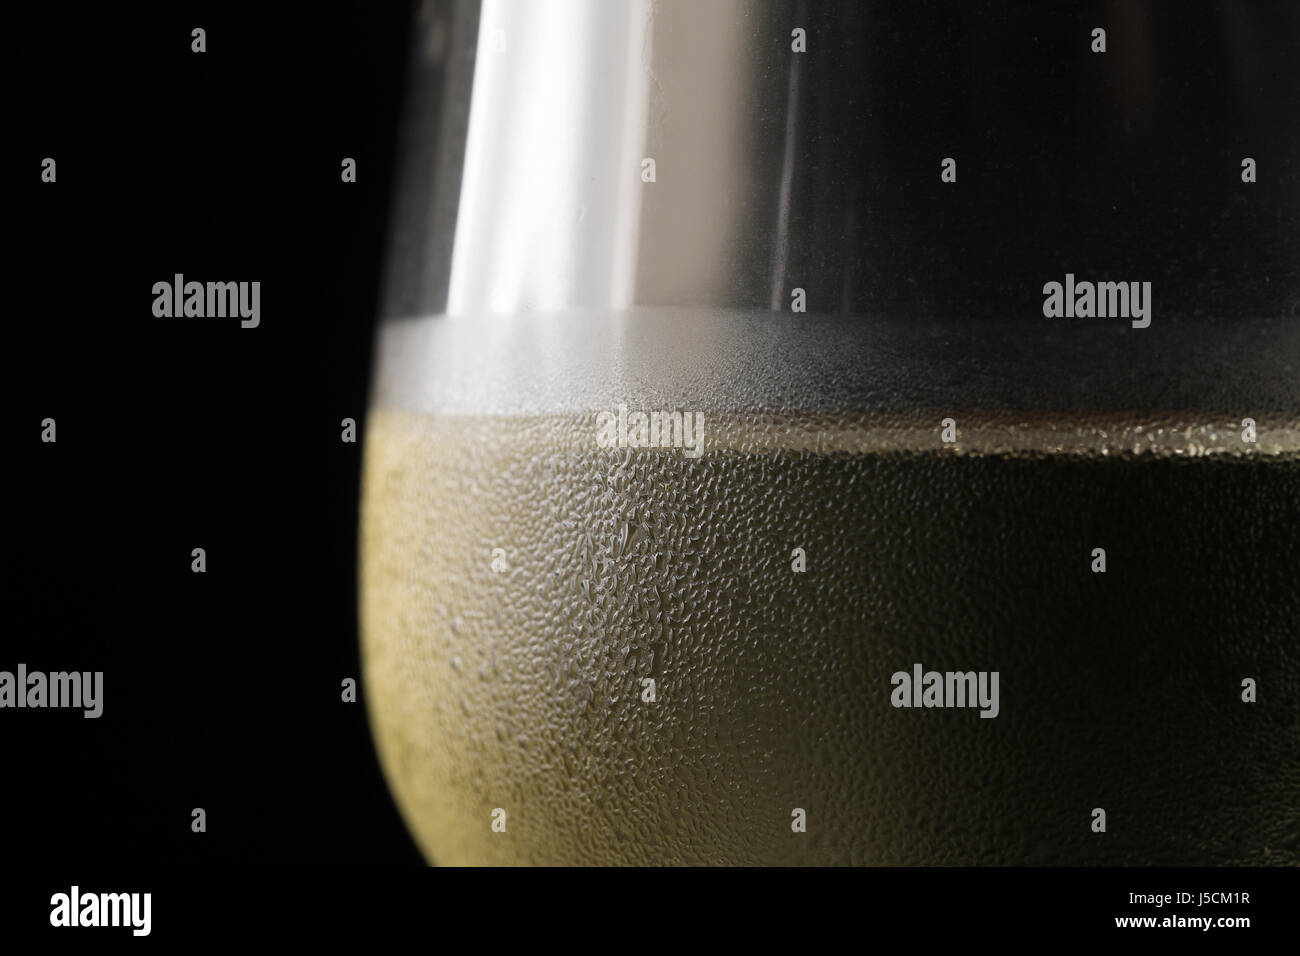 Close up detail of a cold glass of white wine. Stock Photo